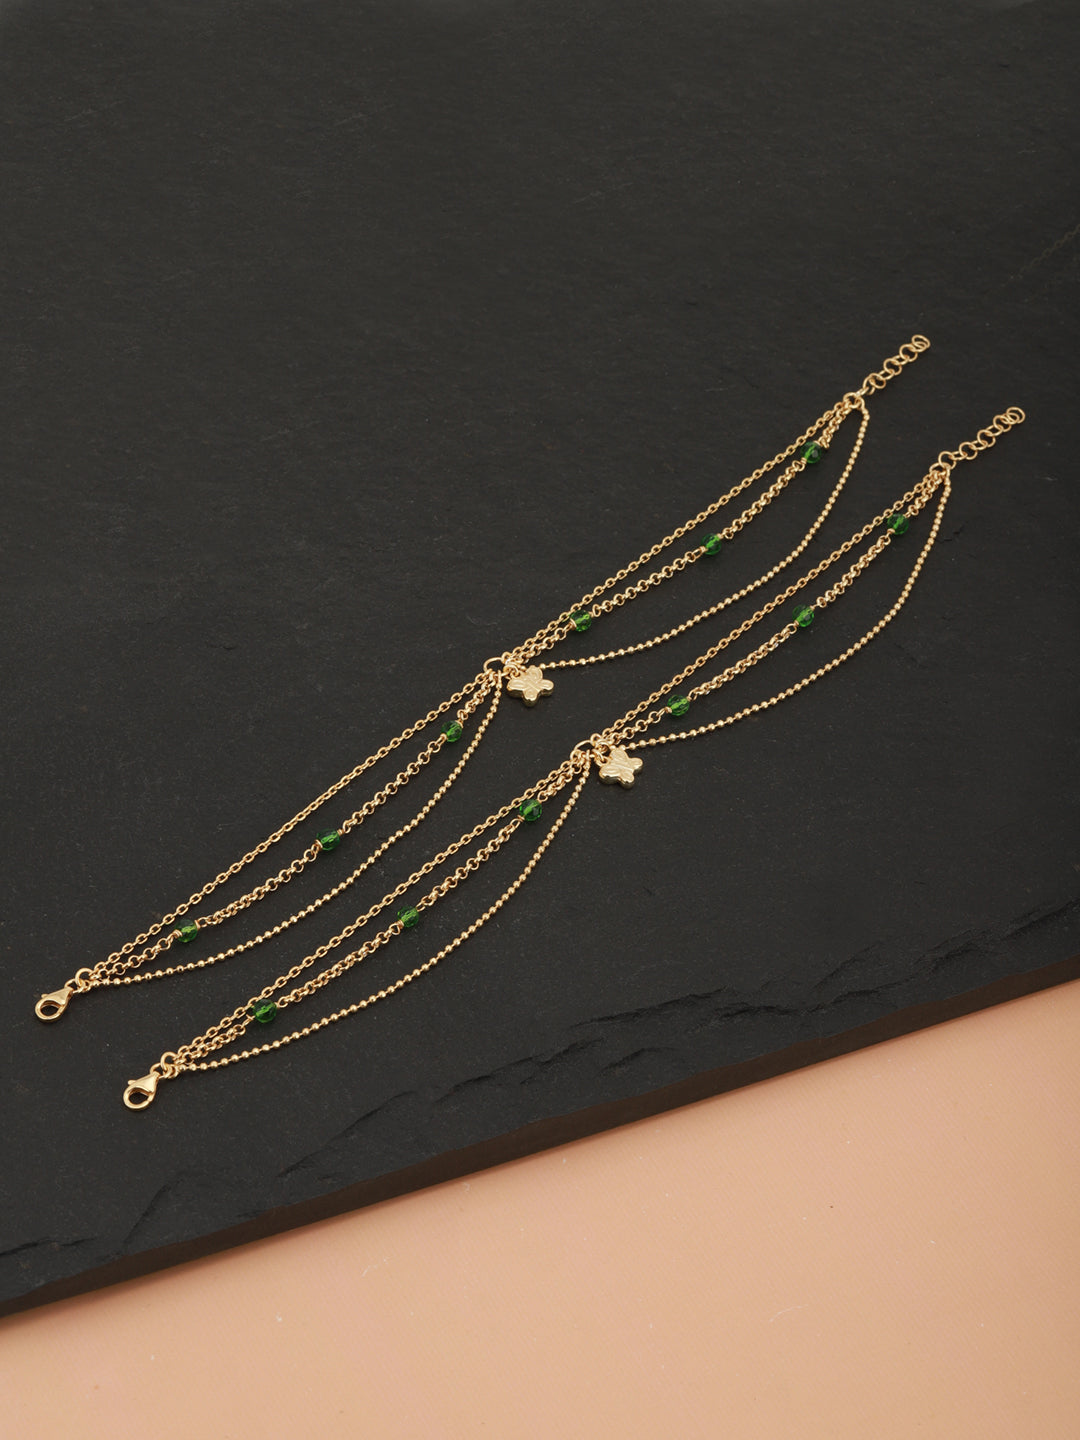 Carlton London -Set Of 2 Gold-Plated Green Beaded Butterfly Shape Layered Anklets For Women